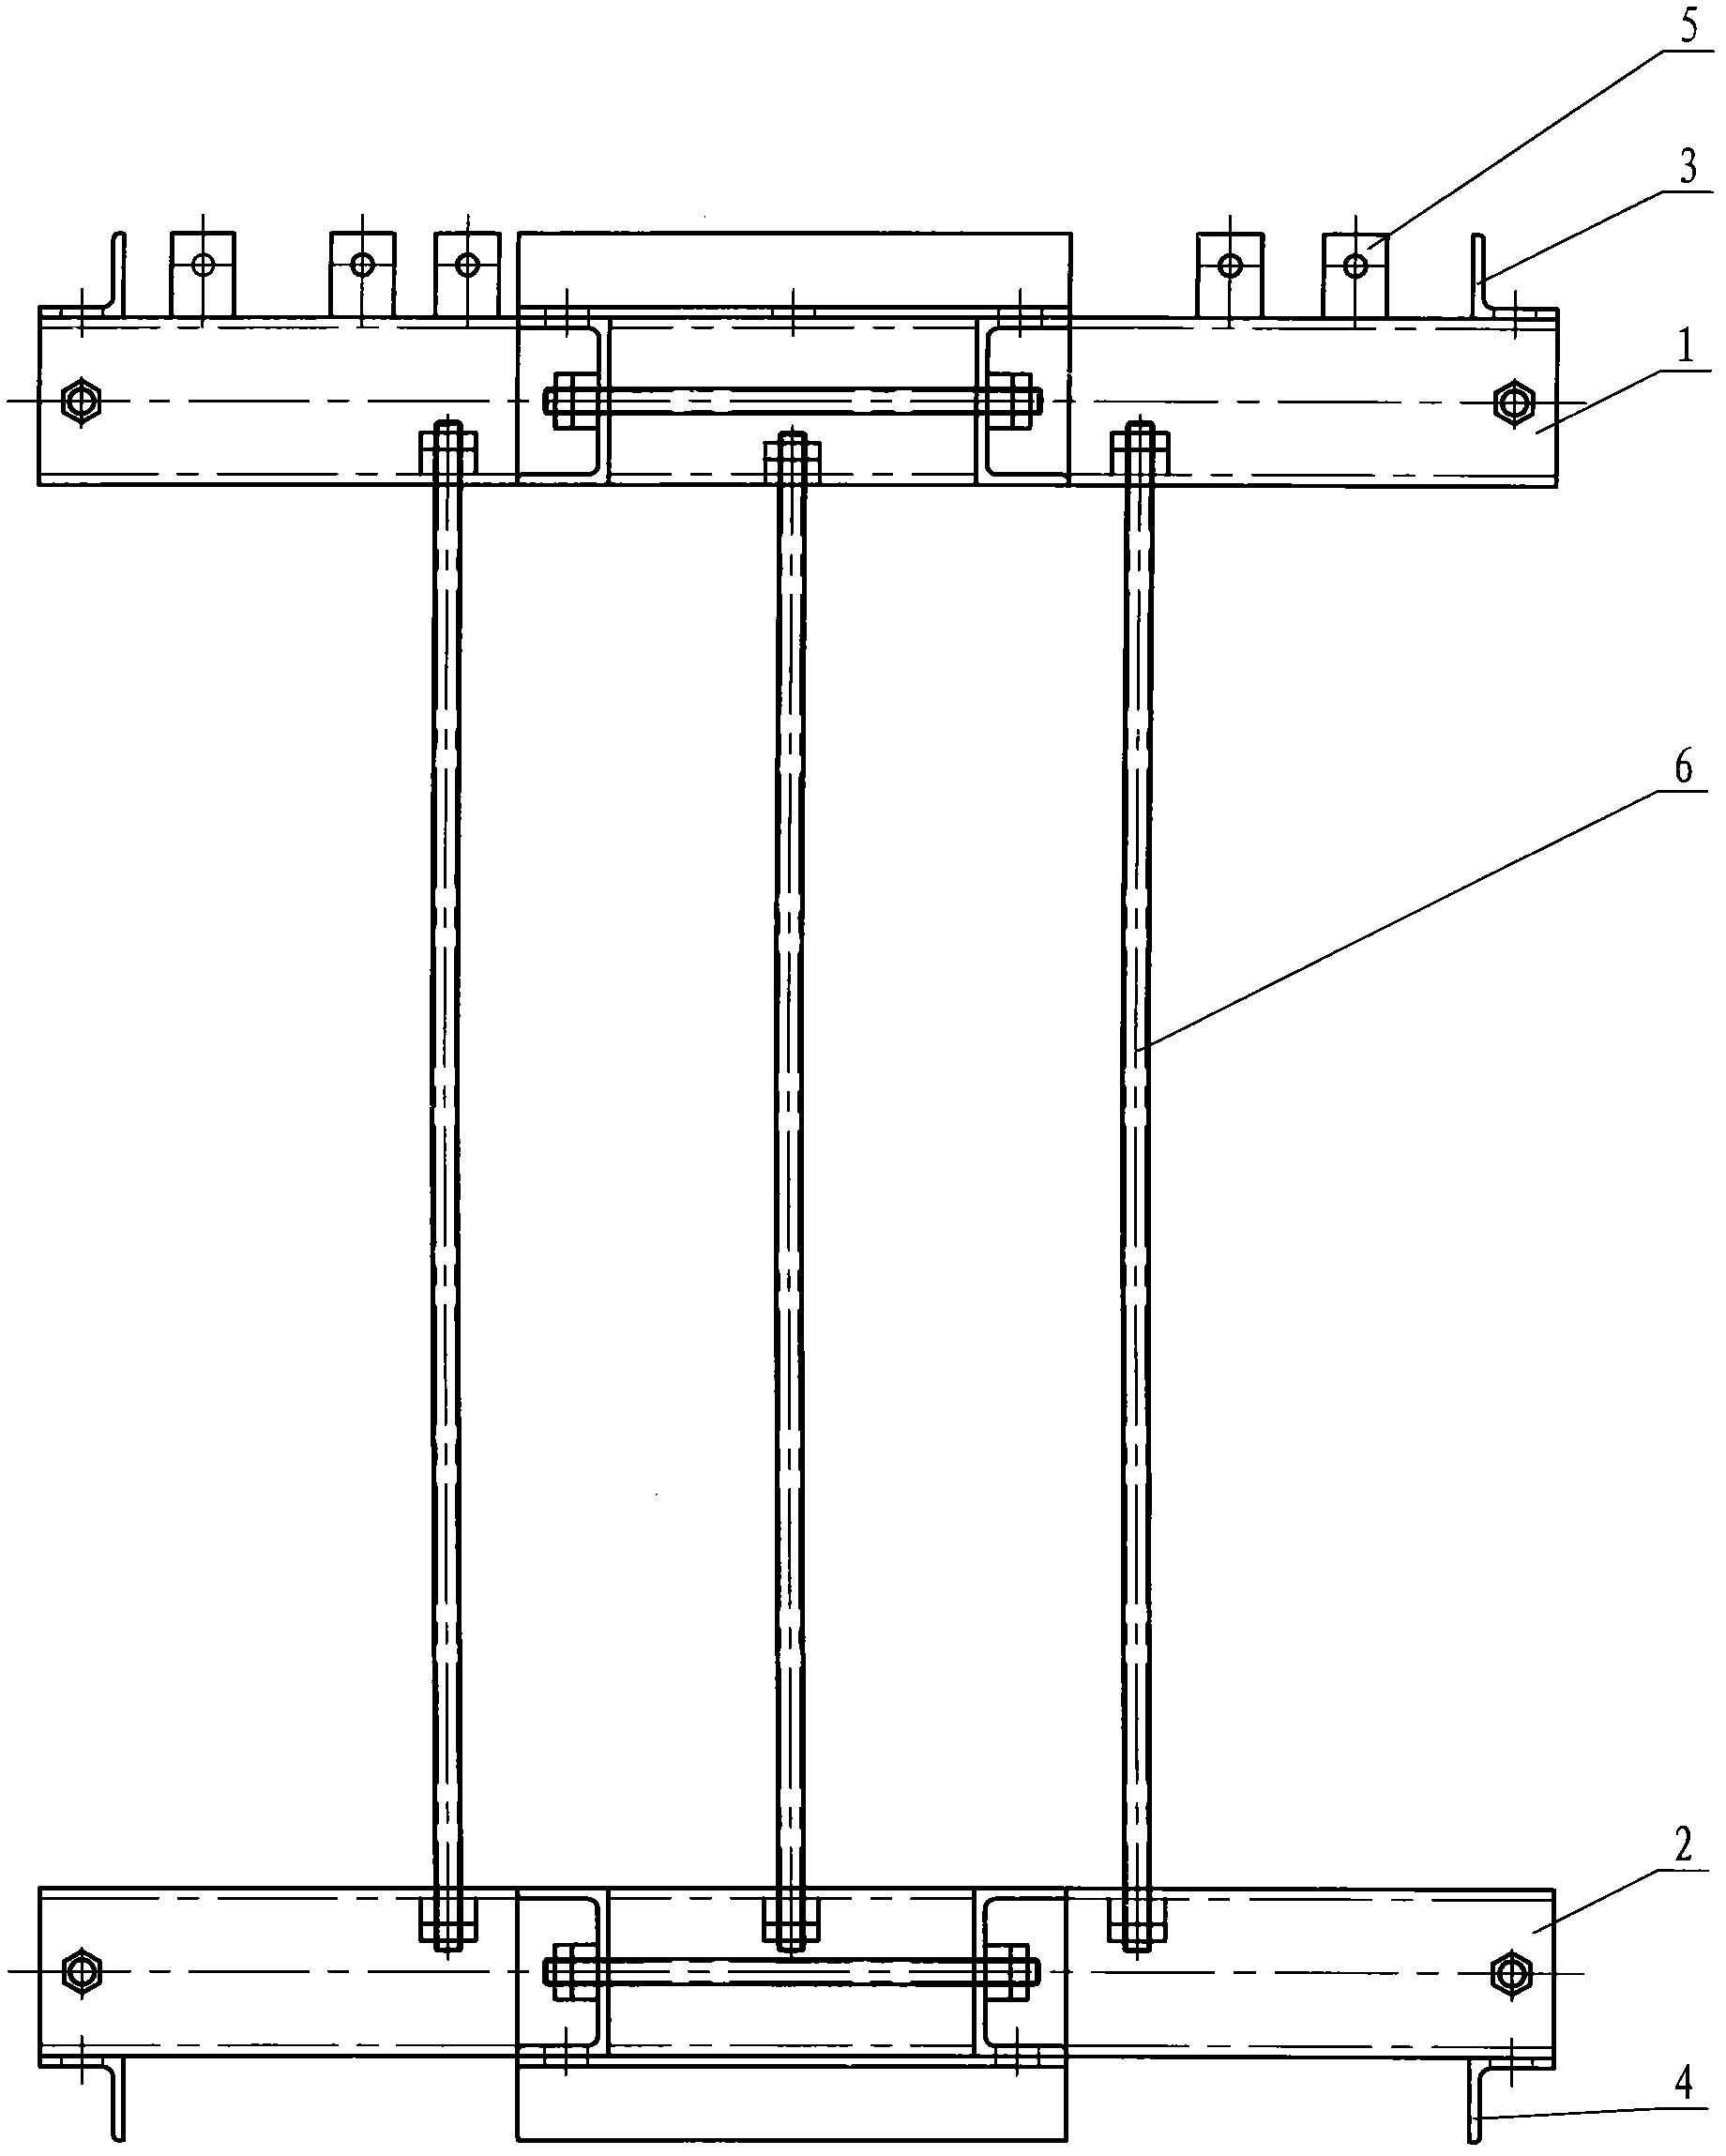 Angle-folded type clamp for three-dimensional iron cores